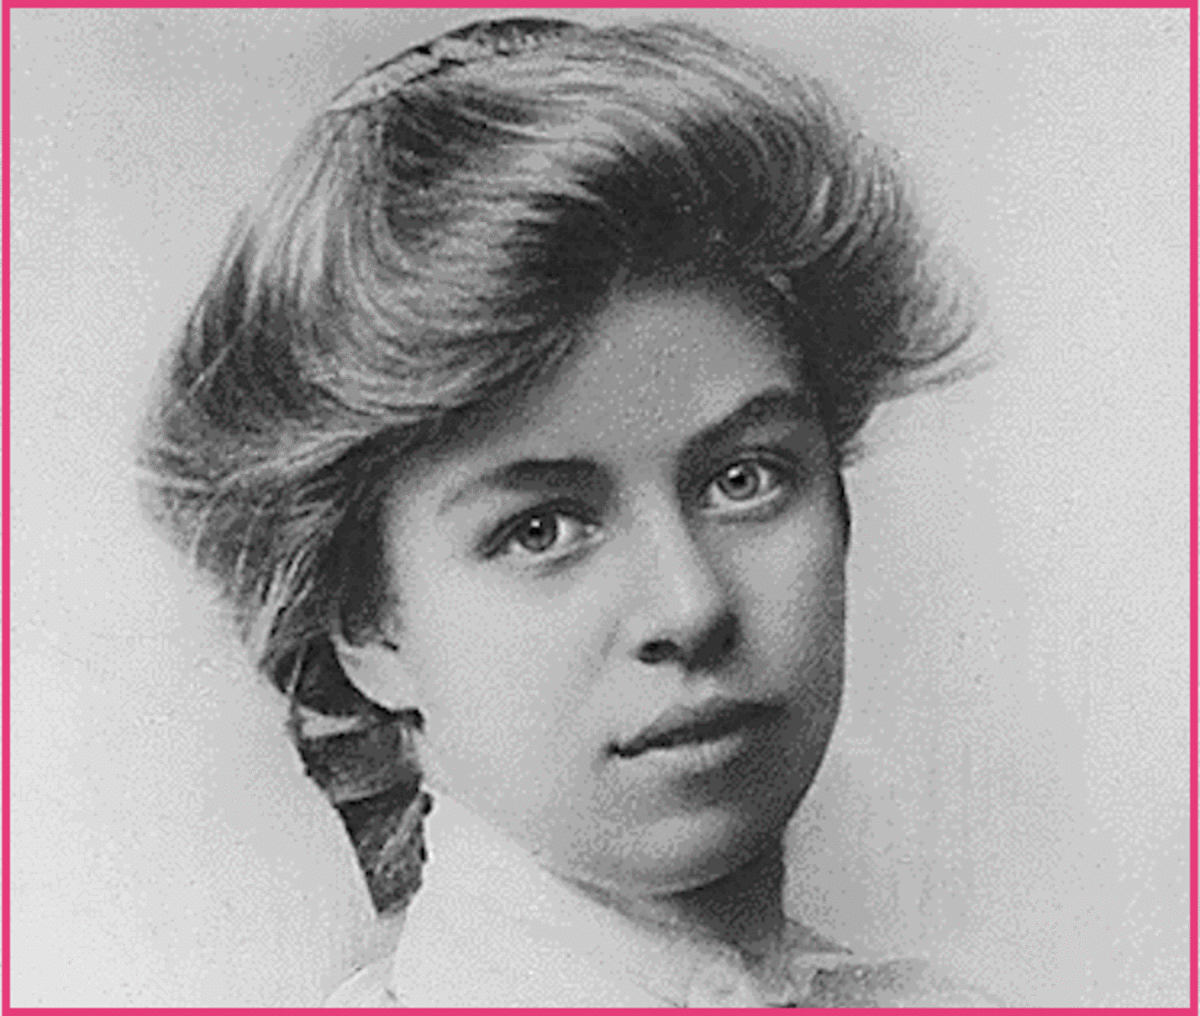 One of America's First Ladies was a famous orphan.  Here's a photo of a beautiful Eleanor Roosevelt when she was still in her teens.